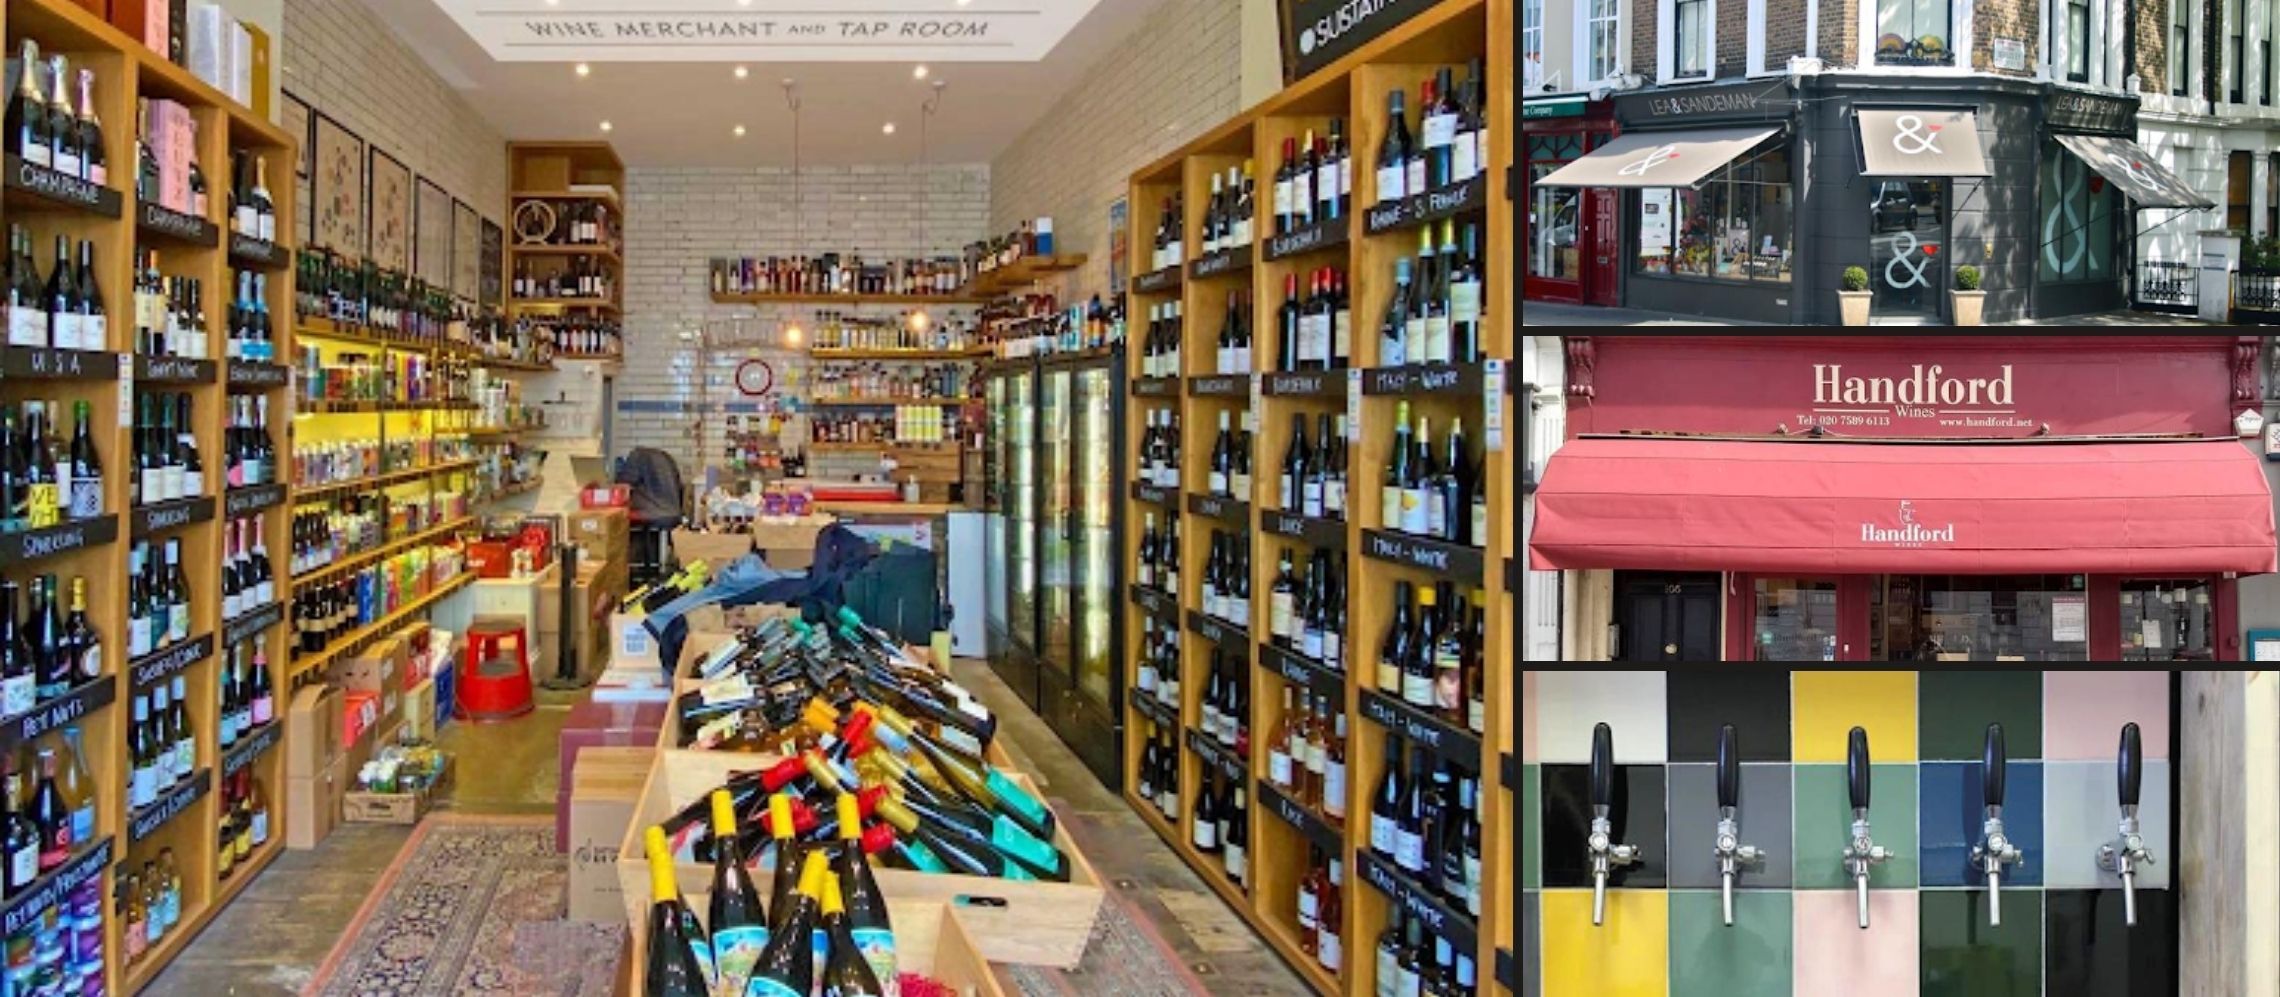 Photo for: London's Awesome Wine Merchants